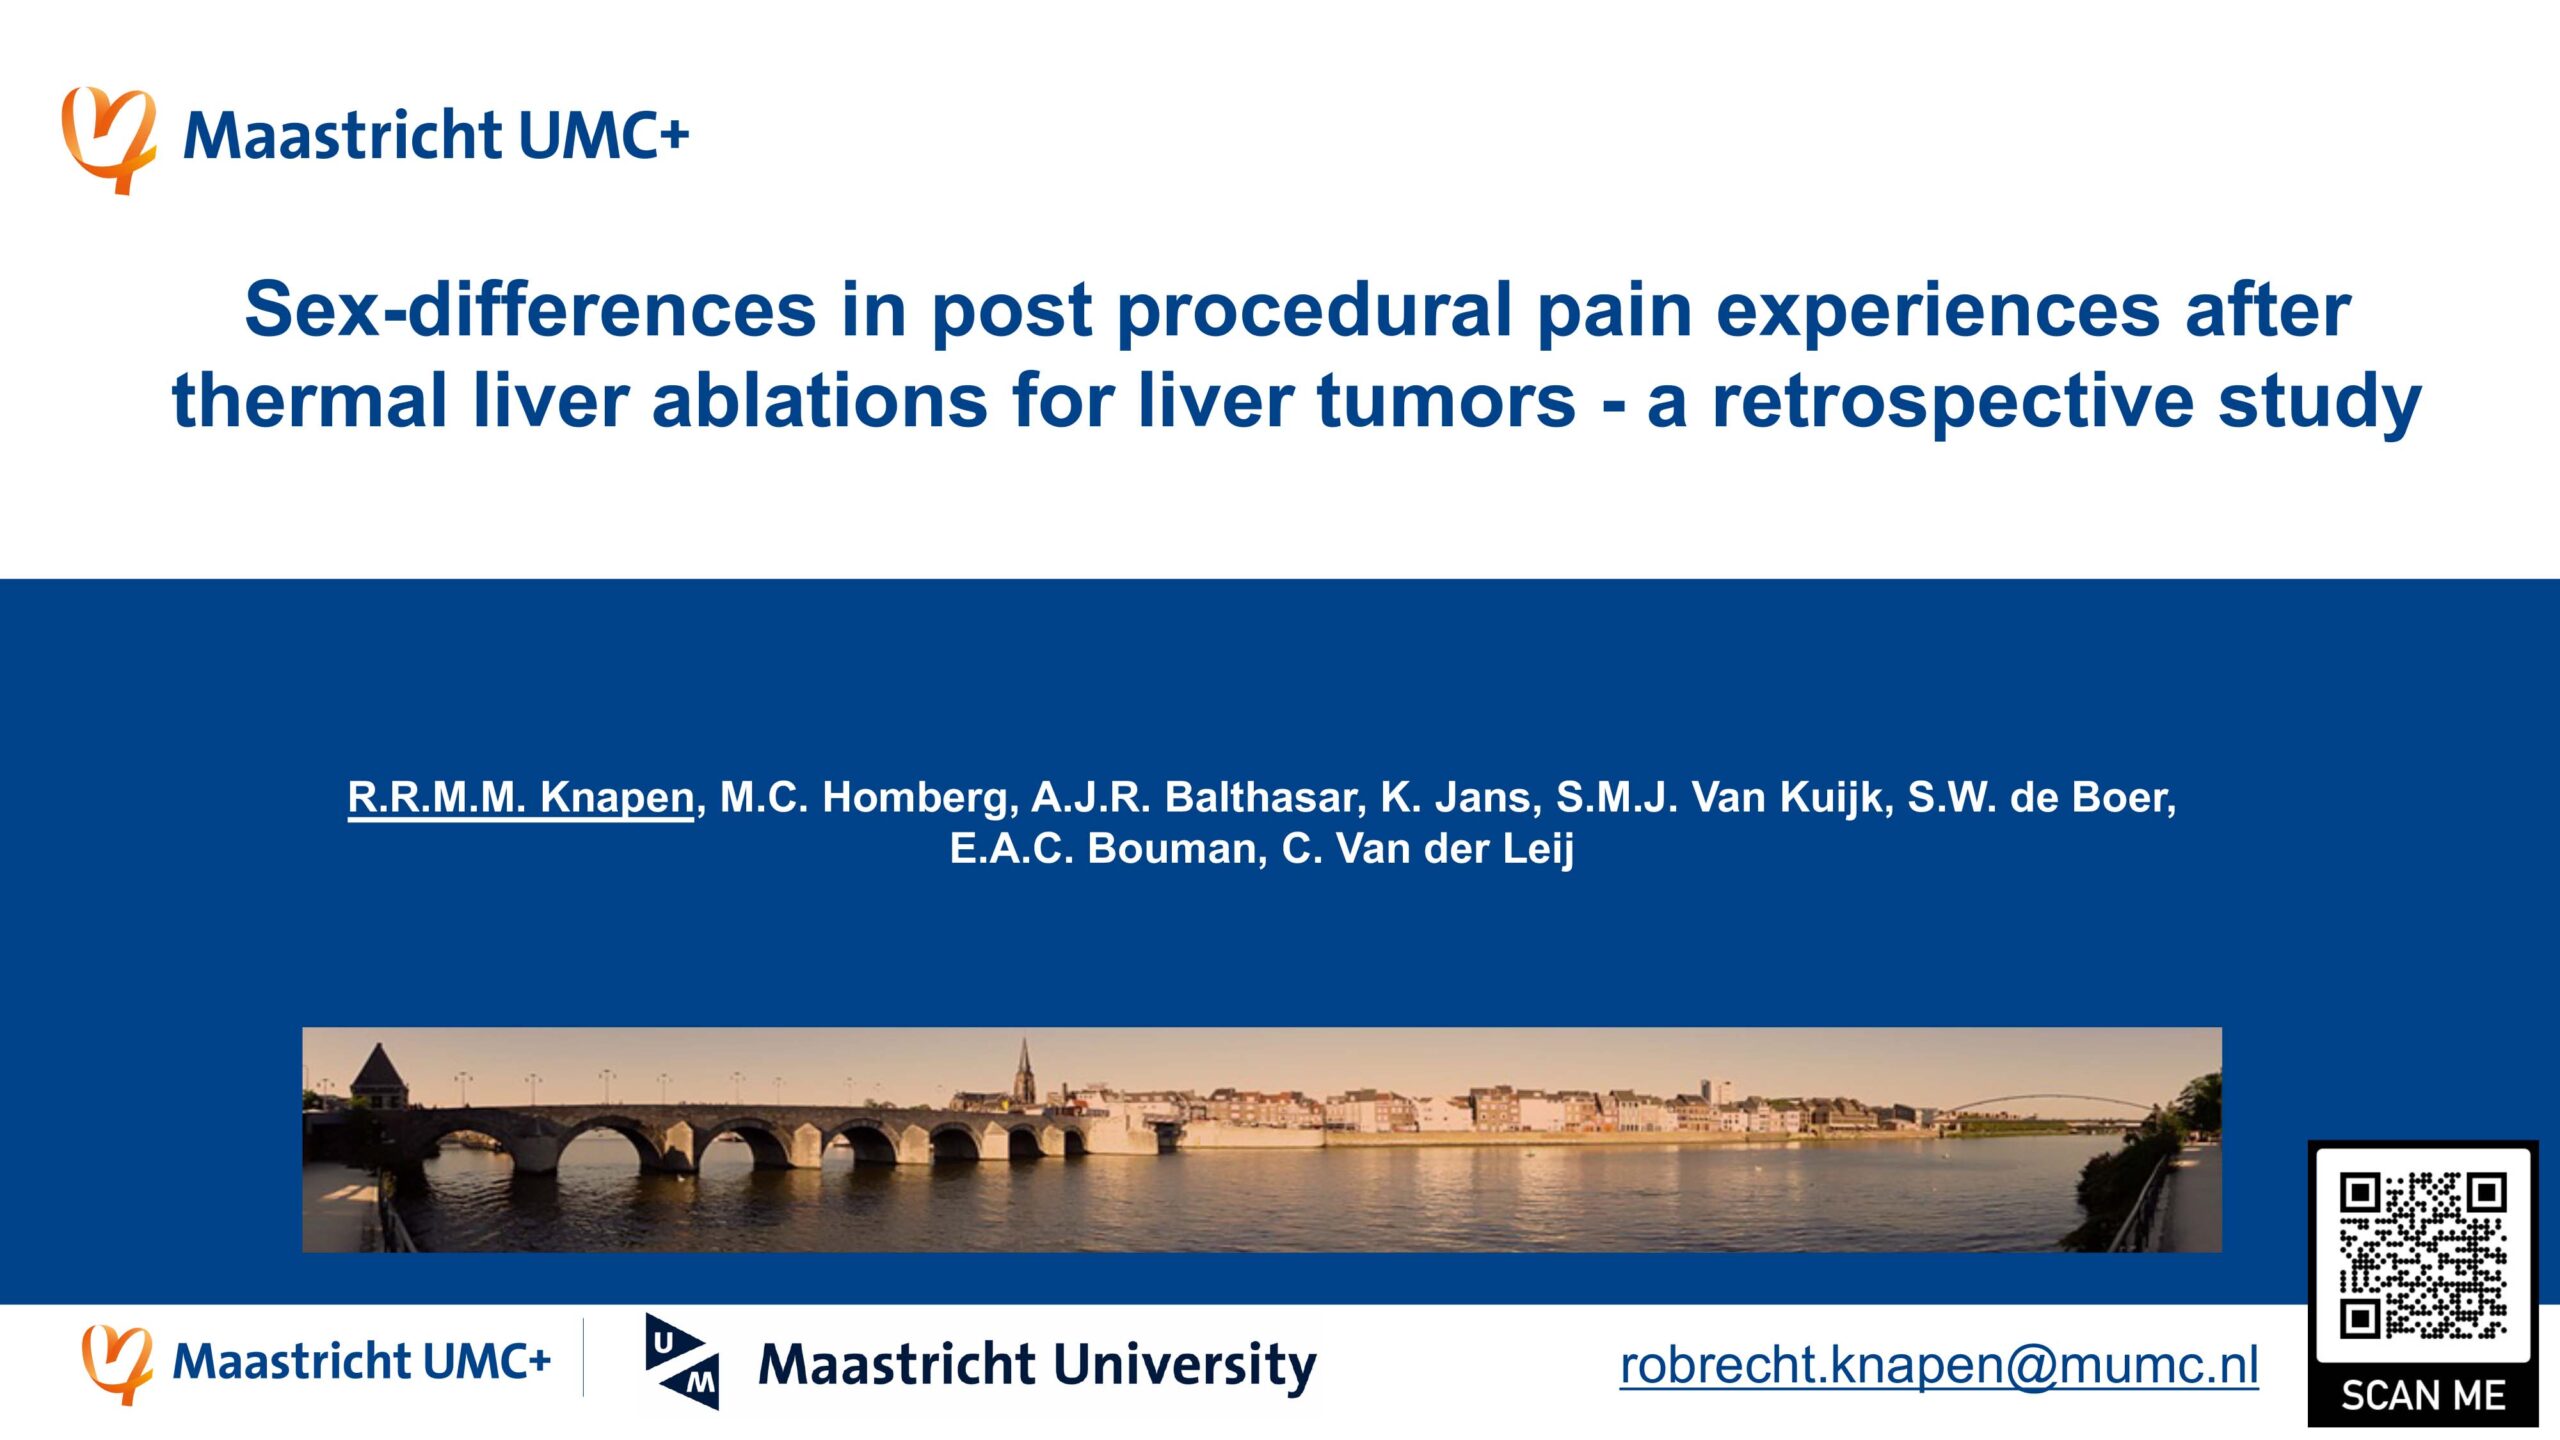 Sexual Differences in the Experience of Acute Post Procedural Pain after Thermal LIver Ablations; a Retrospective Study